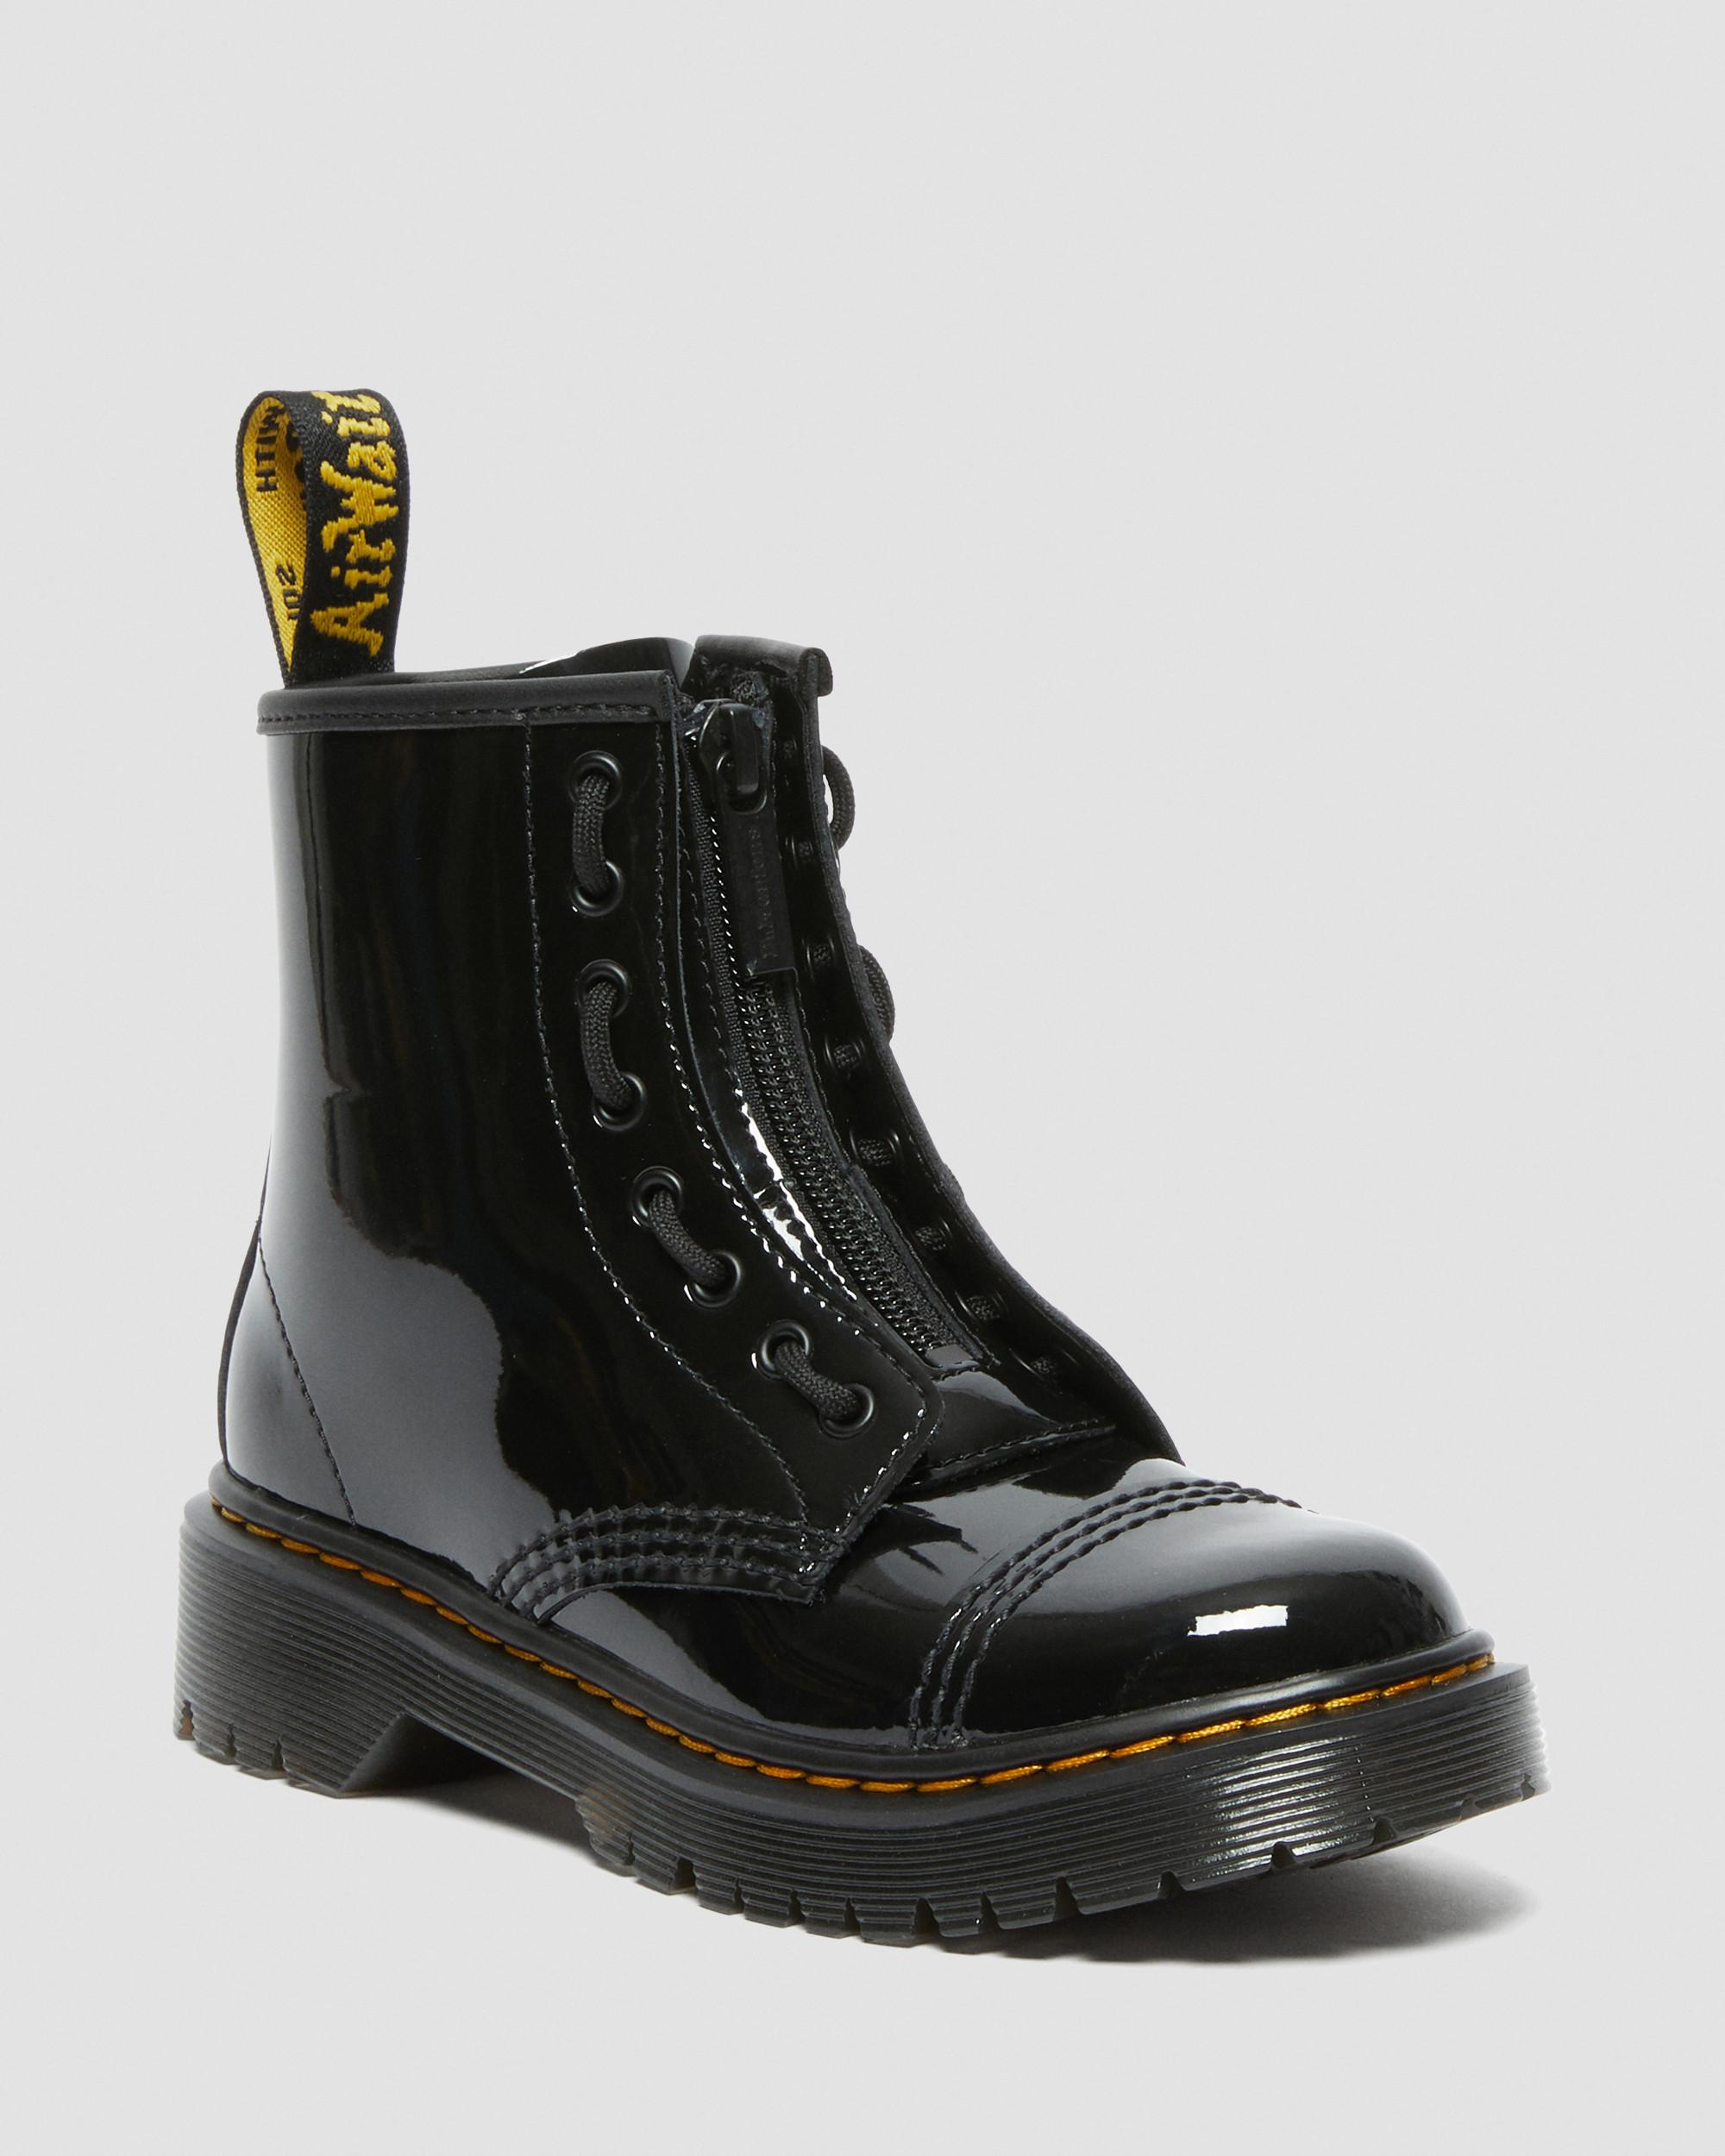 Junior 1460 Leopard Hydro Leather Lace Up Boots in Black | Dr. Martens